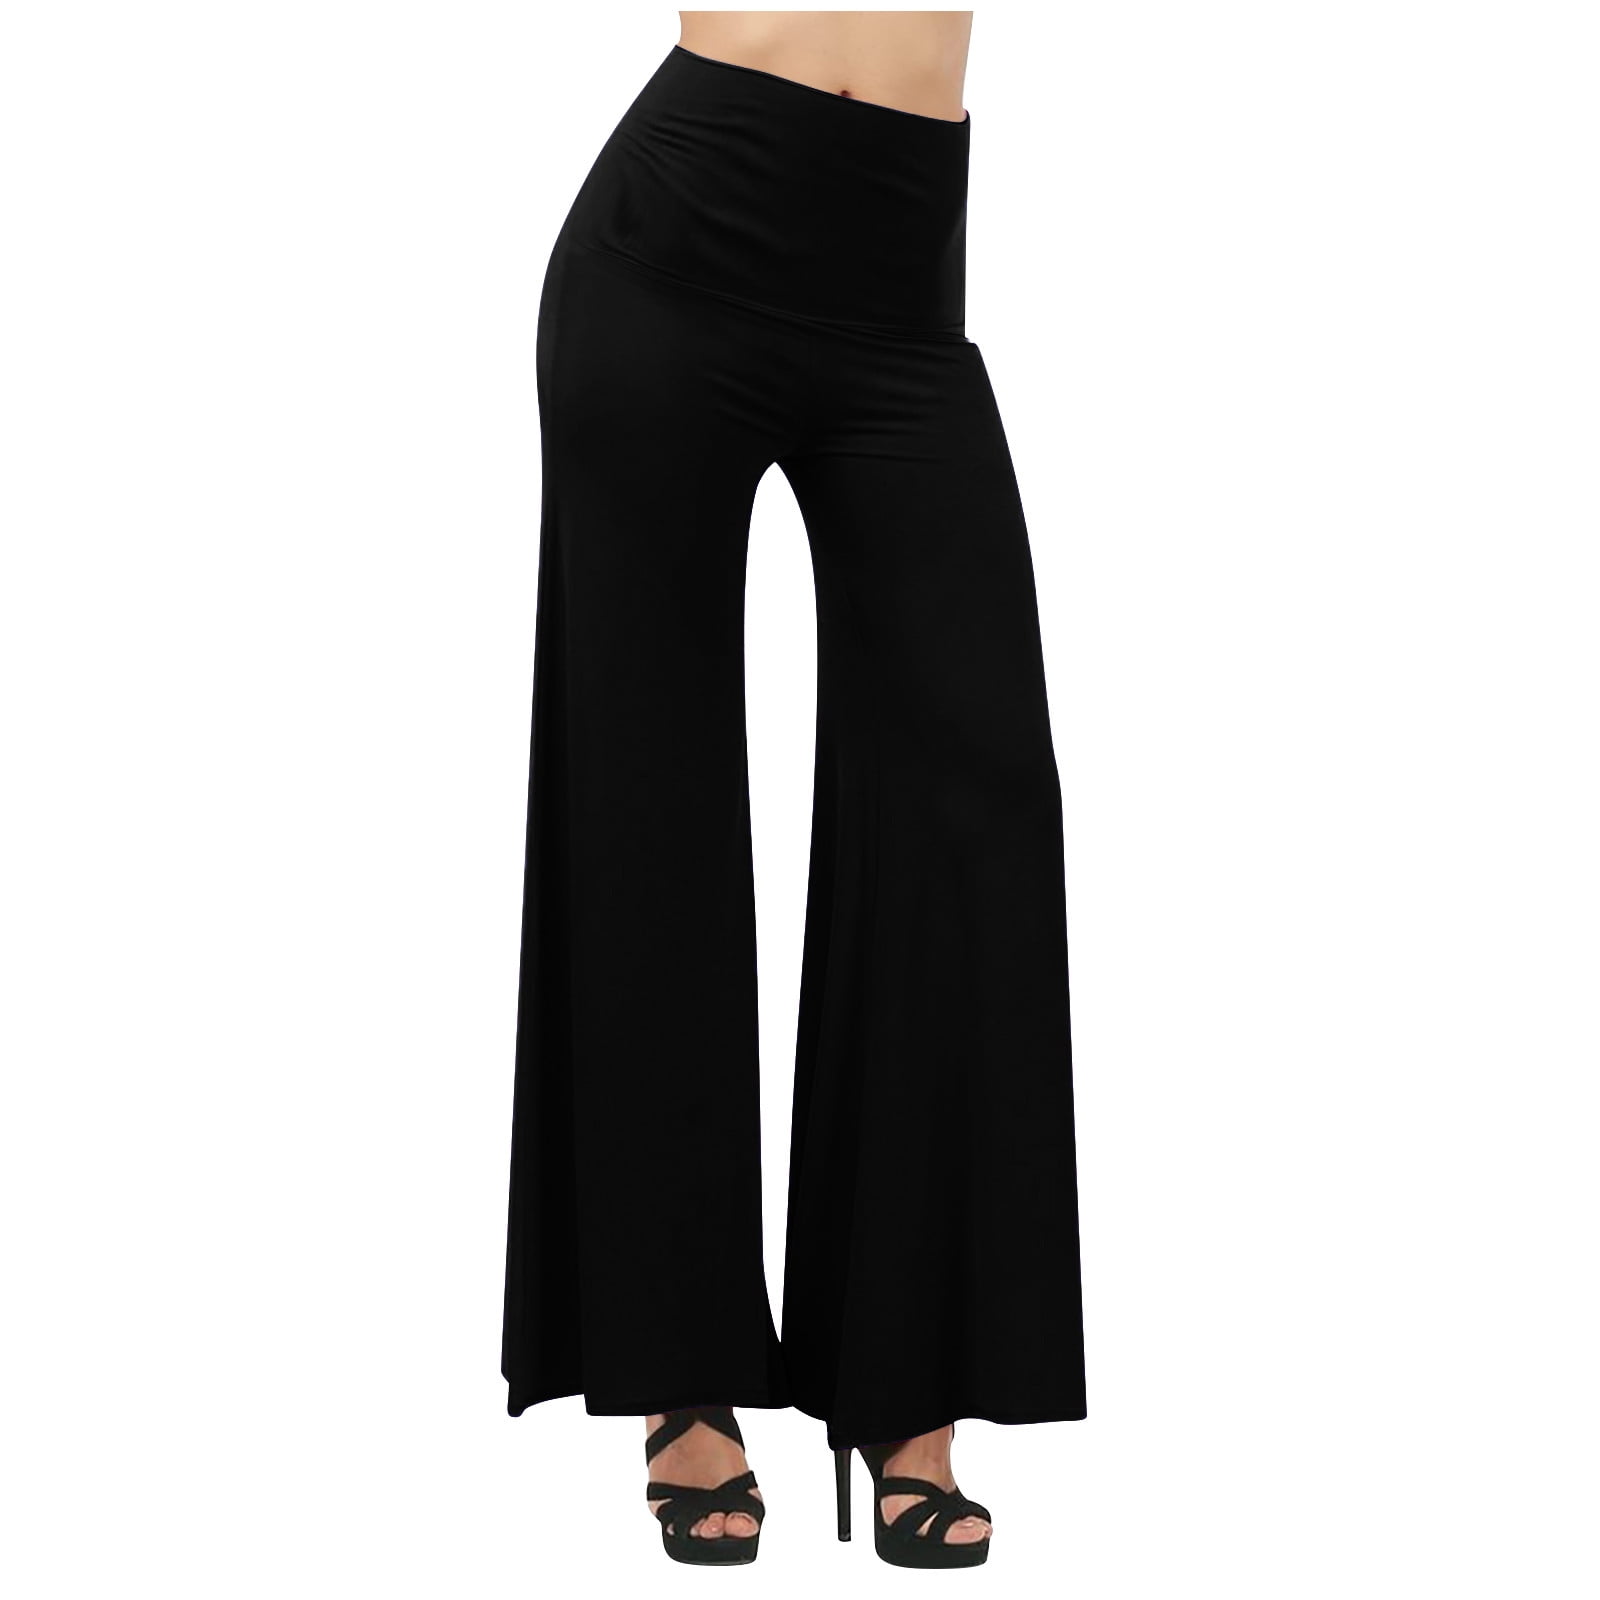 Flare Leggings for Women Classic High Waisted Solid Color Yoga